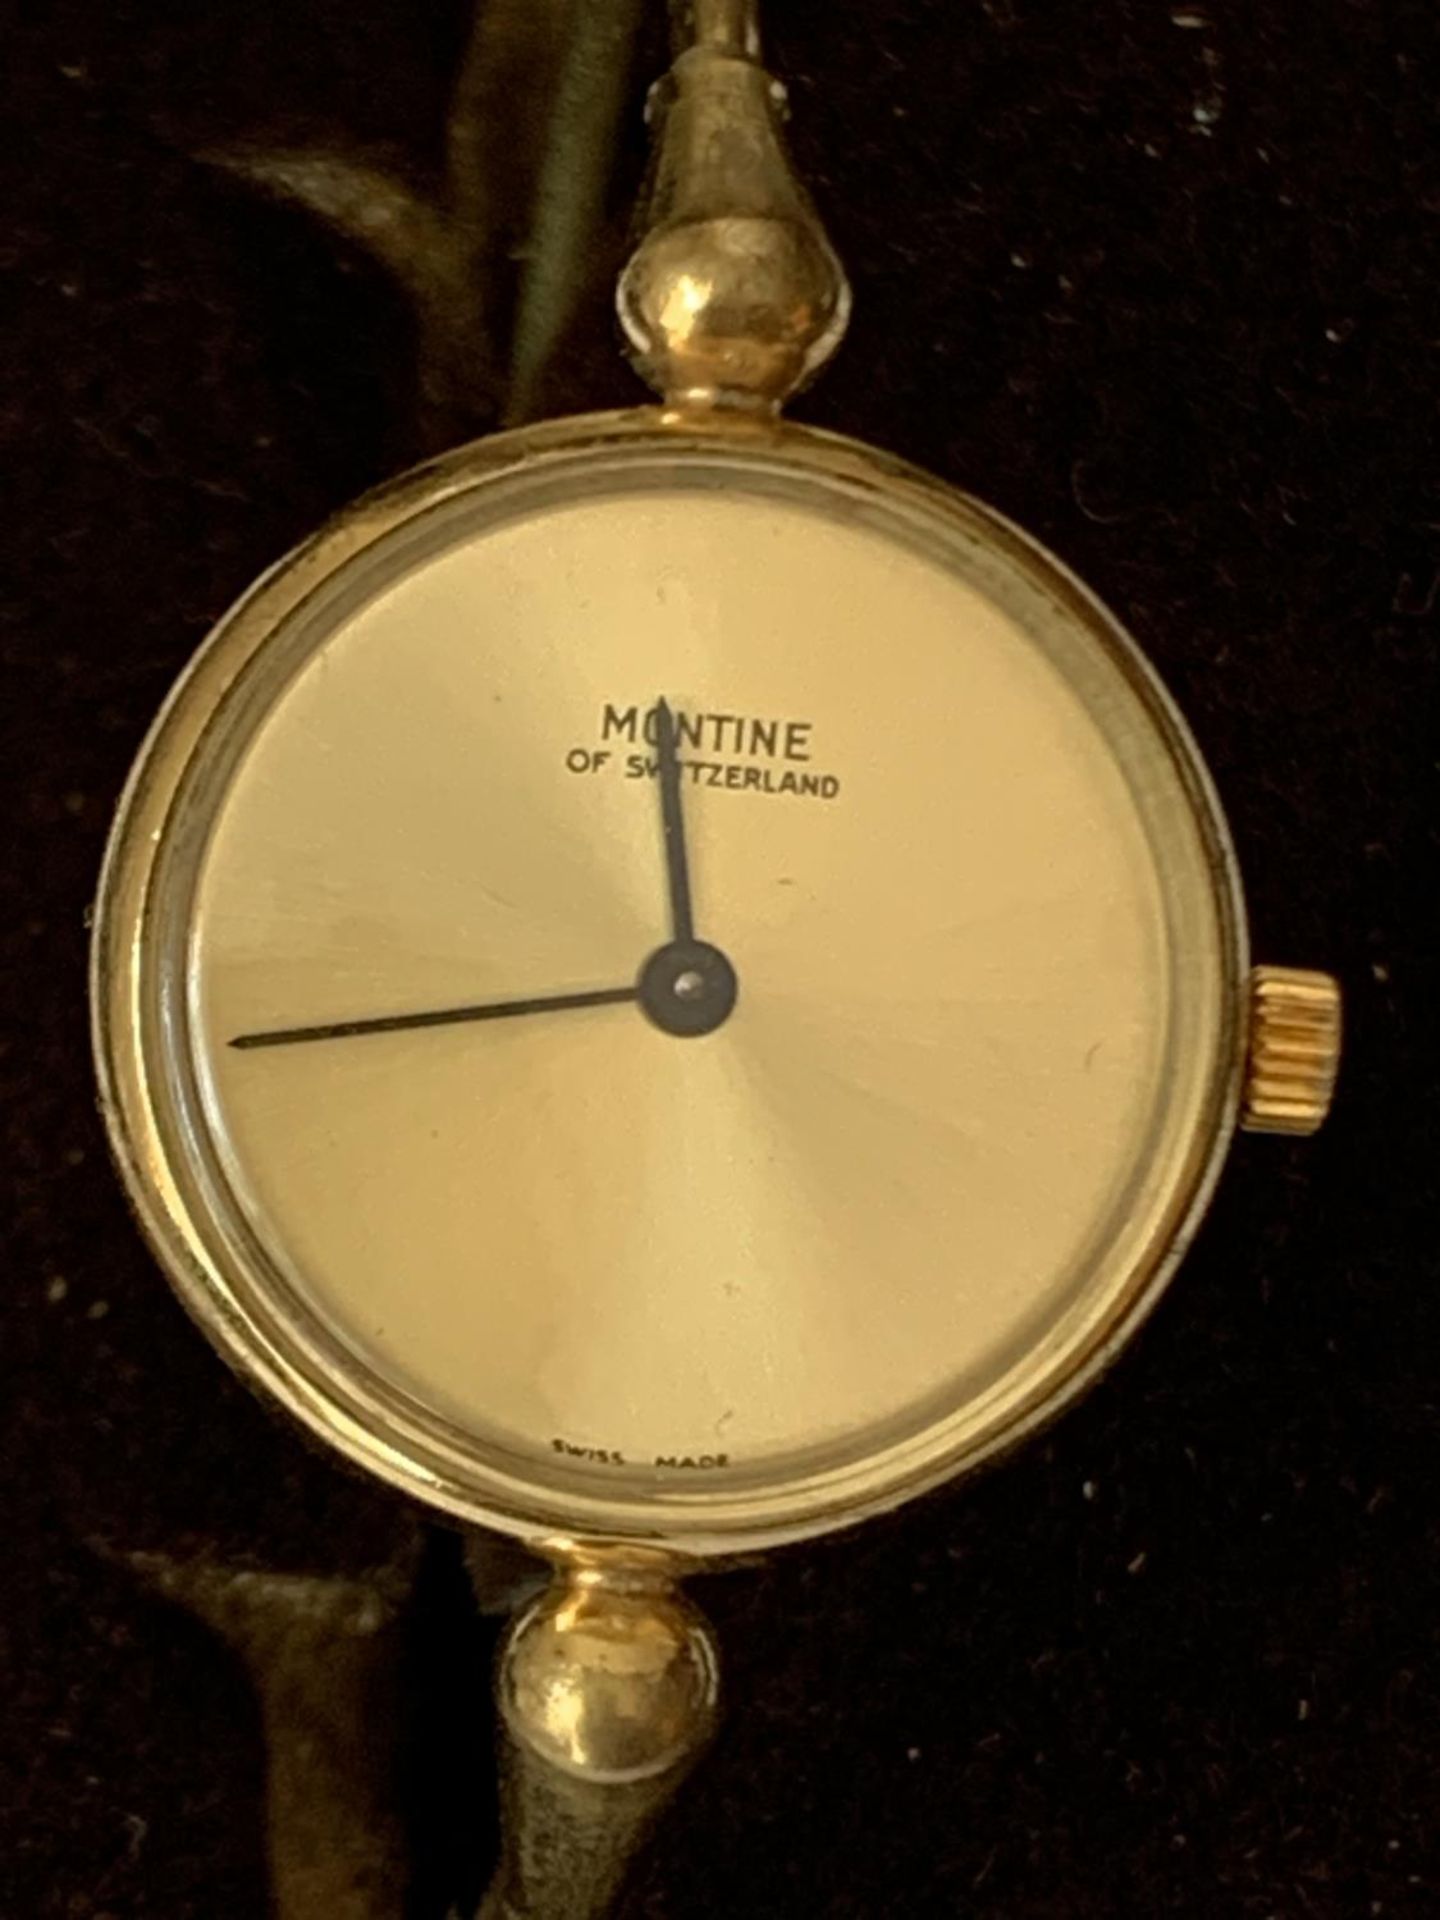 A LADIES MONTINE WRISTWATCH IN A PRESENTATION BOX SEEN WORKING BUT NO WARRANTY - Image 2 of 3